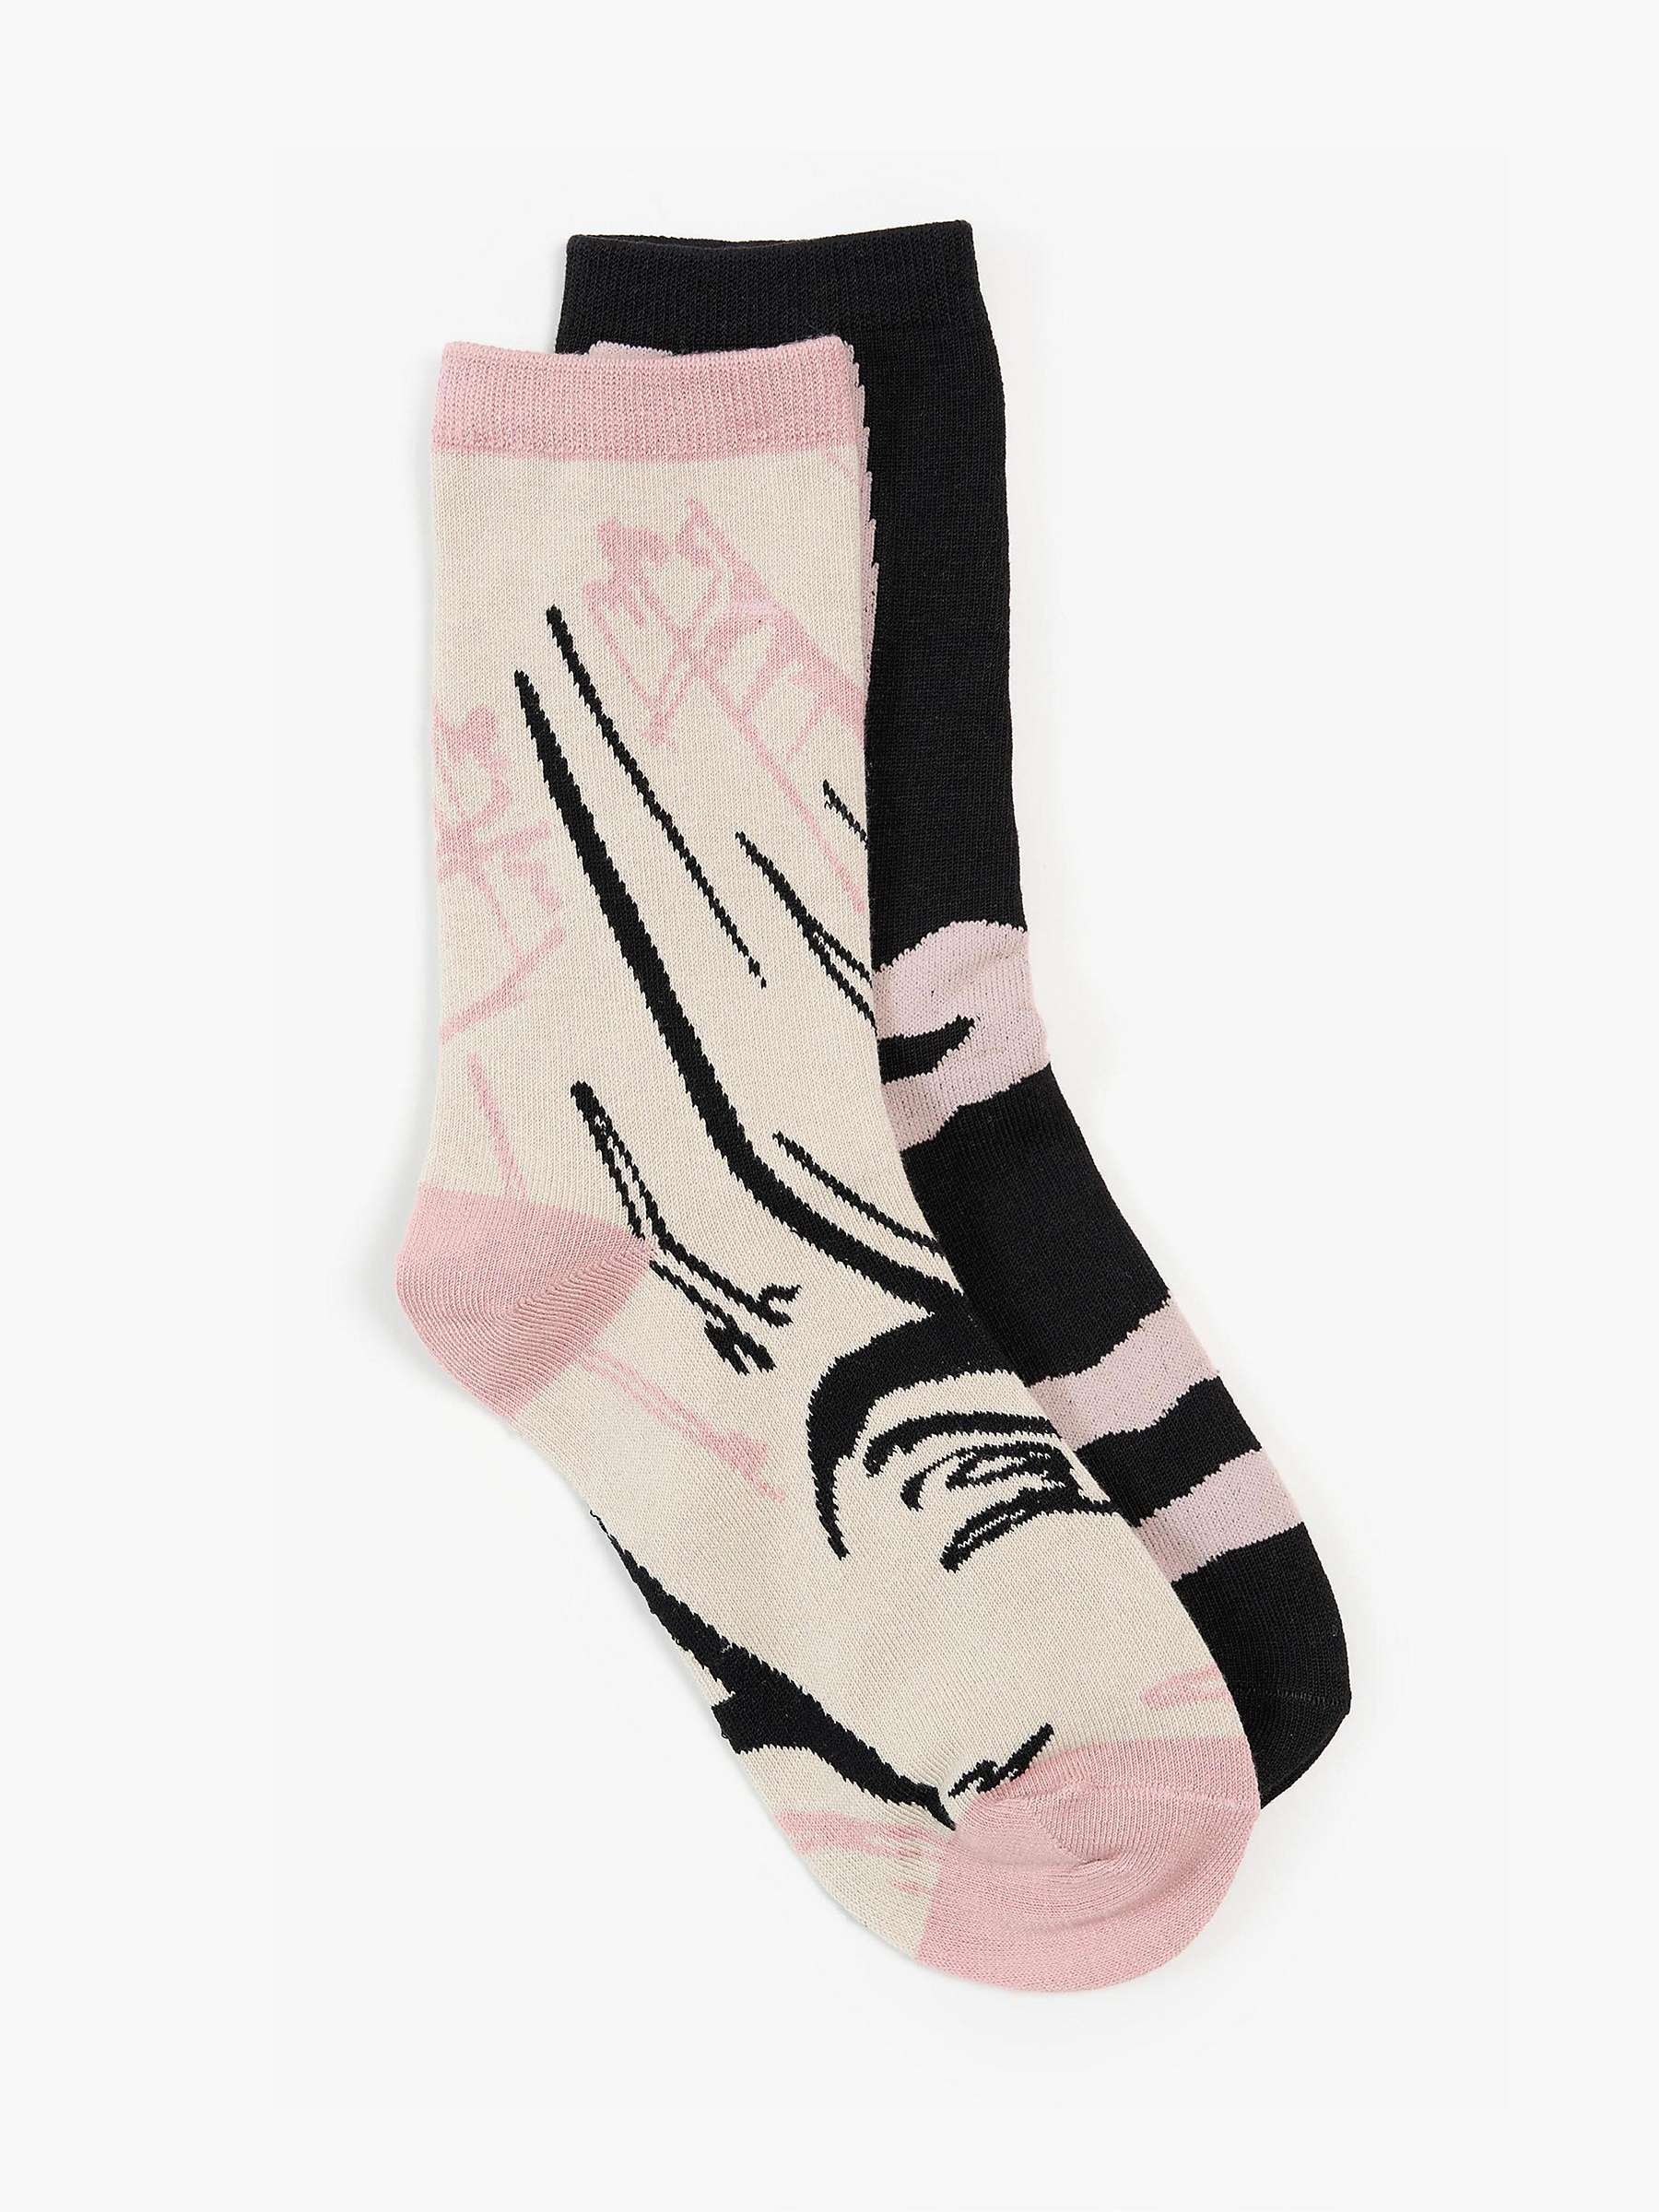 Buy Tutti & Co Wild & Muse Patterned Ankle Socks, Pack of 2, Black/Multi Online at johnlewis.com